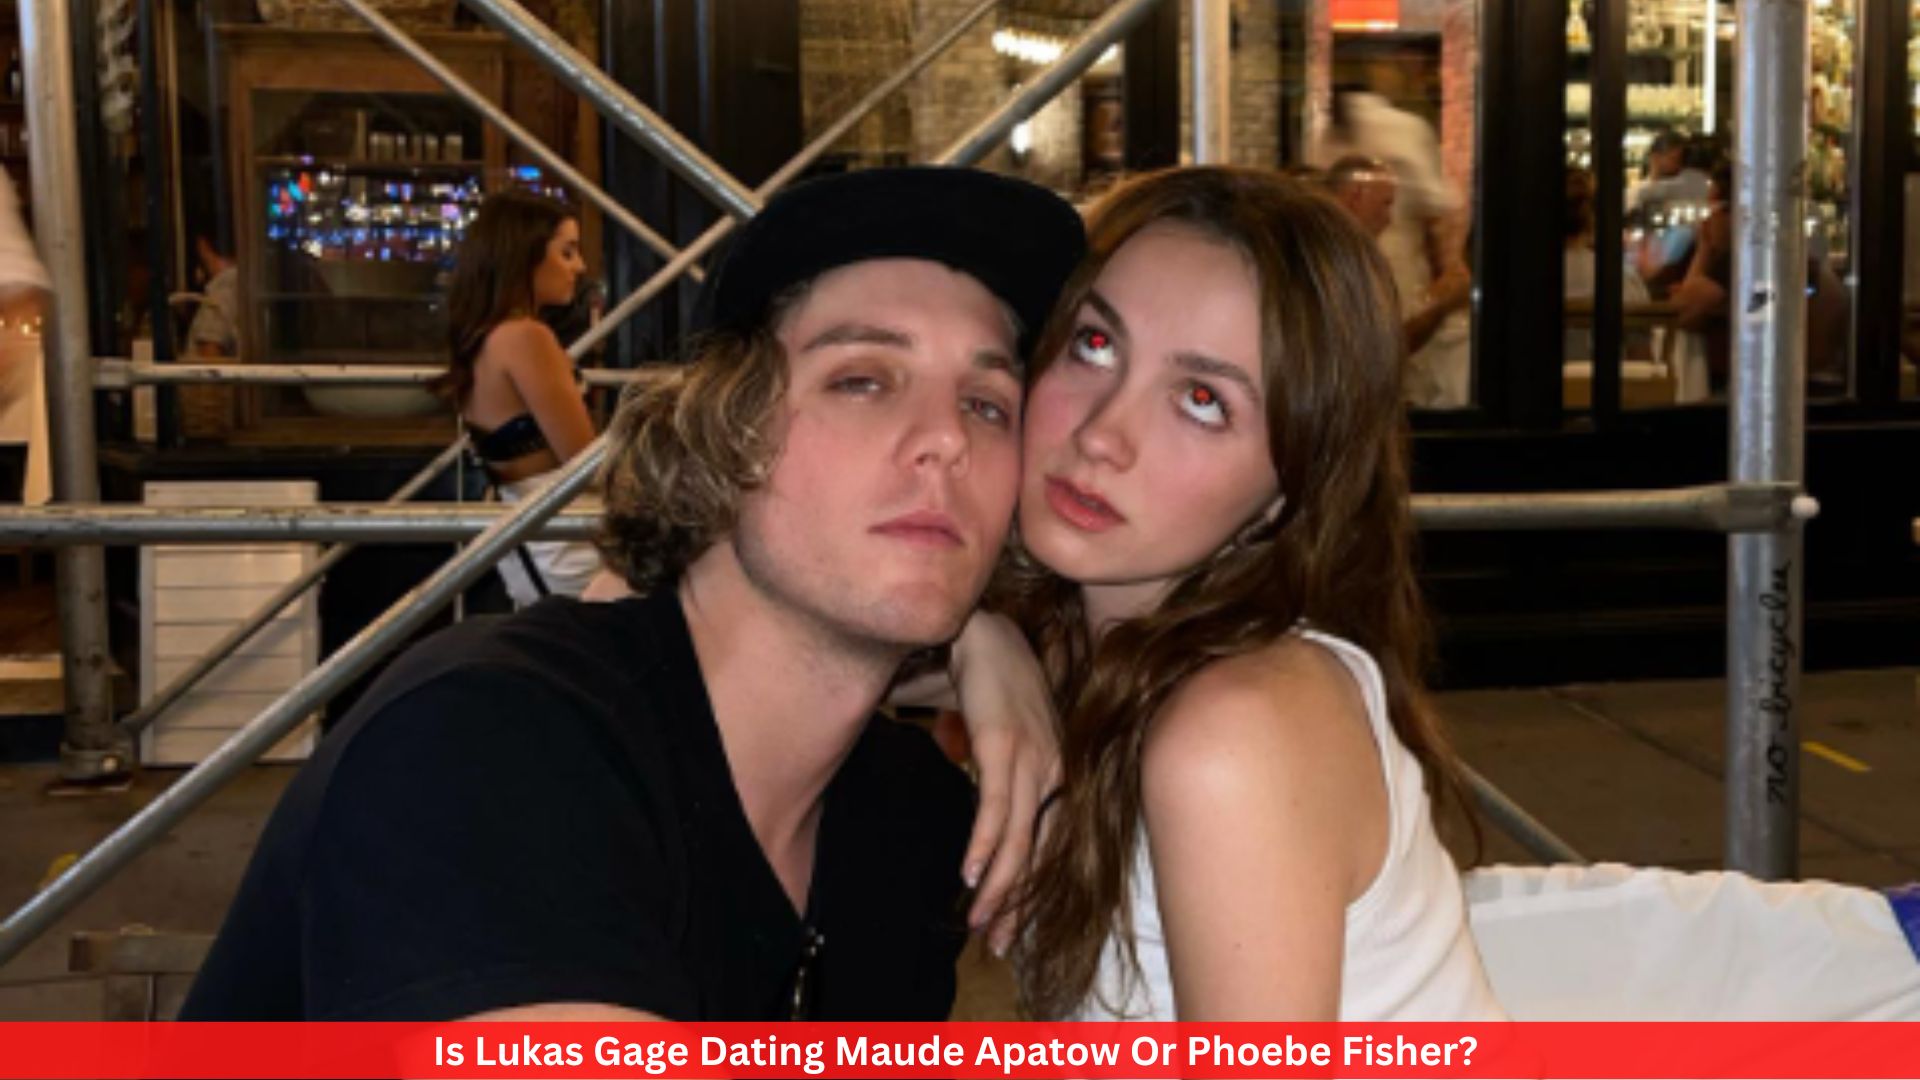 Is Lukas Gage Dating Maude Apatow Or Phoebe Fisher?